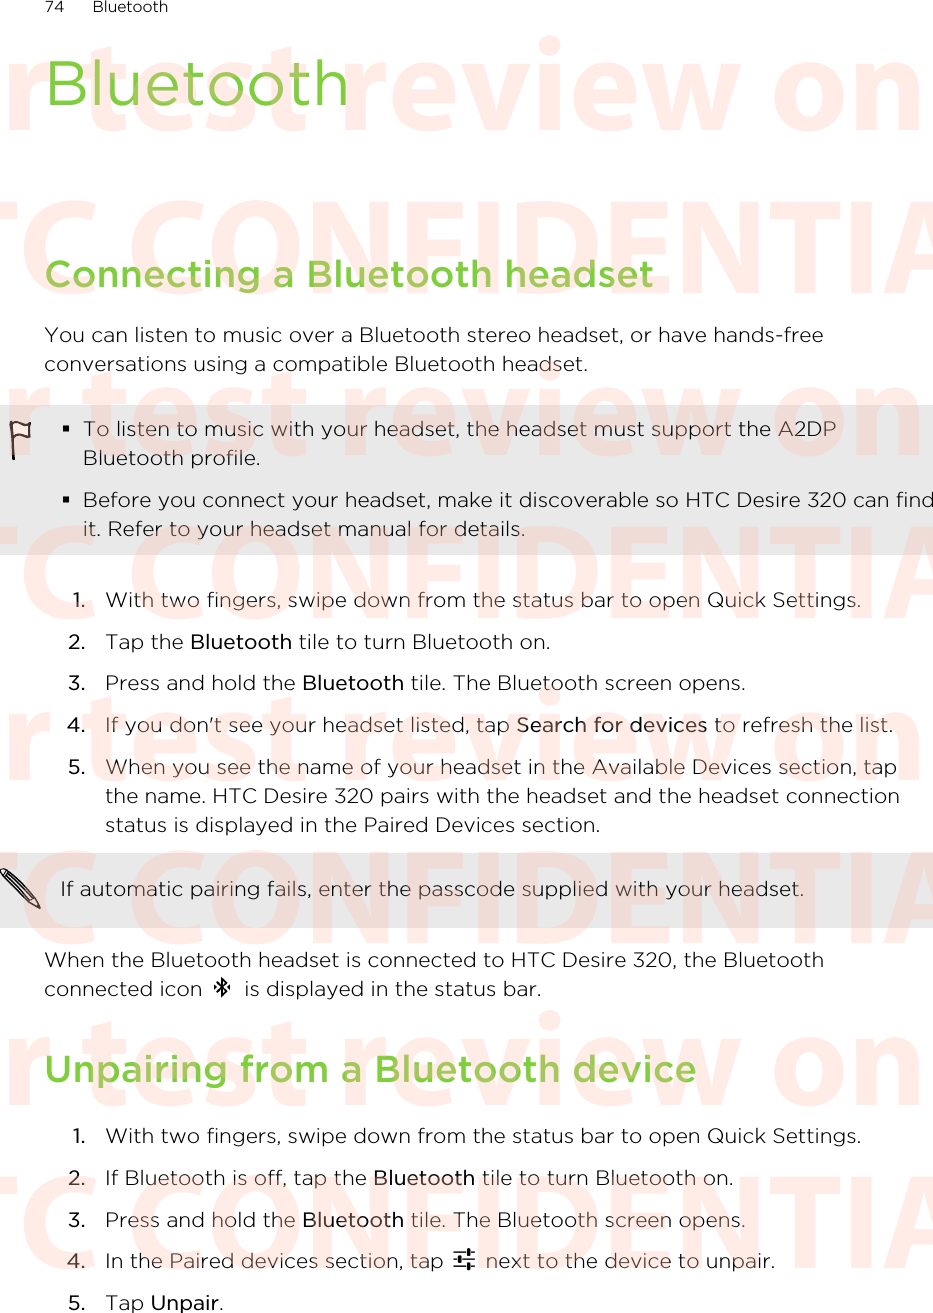 BluetoothConnecting a Bluetooth headsetYou can listen to music over a Bluetooth stereo headset, or have hands-freeconversations using a compatible Bluetooth headset.§To listen to music with your headset, the headset must support the A2DPBluetooth profile.§Before you connect your headset, make it discoverable so HTC Desire 320 can findit. Refer to your headset manual for details.1. With two fingers, swipe down from the status bar to open Quick Settings.2. Tap the Bluetooth tile to turn Bluetooth on.3. Press and hold the Bluetooth tile. The Bluetooth screen opens.4. If you don&apos;t see your headset listed, tap Search for devices to refresh the list.5. When you see the name of your headset in the Available Devices section, tapthe name. HTC Desire 320 pairs with the headset and the headset connectionstatus is displayed in the Paired Devices section.If automatic pairing fails, enter the passcode supplied with your headset.When the Bluetooth headset is connected to HTC Desire 320, the Bluetoothconnected icon   is displayed in the status bar.Unpairing from a Bluetooth device1. With two fingers, swipe down from the status bar to open Quick Settings.2. If Bluetooth is off, tap the Bluetooth tile to turn Bluetooth on.3. Press and hold the Bluetooth tile. The Bluetooth screen opens.4. In the Paired devices section, tap   next to the device to unpair.5. Tap Unpair.74 BluetoothHTC CONFIDENTIAL For test review only HTC CONFIDENTIAL For test review only HTC CONFIDENTIAL For test review only HTC CONFIDENTIAL For test review only HTC CONFIDENTIAL For test review only HTC CONFIDENTIAL For test review only